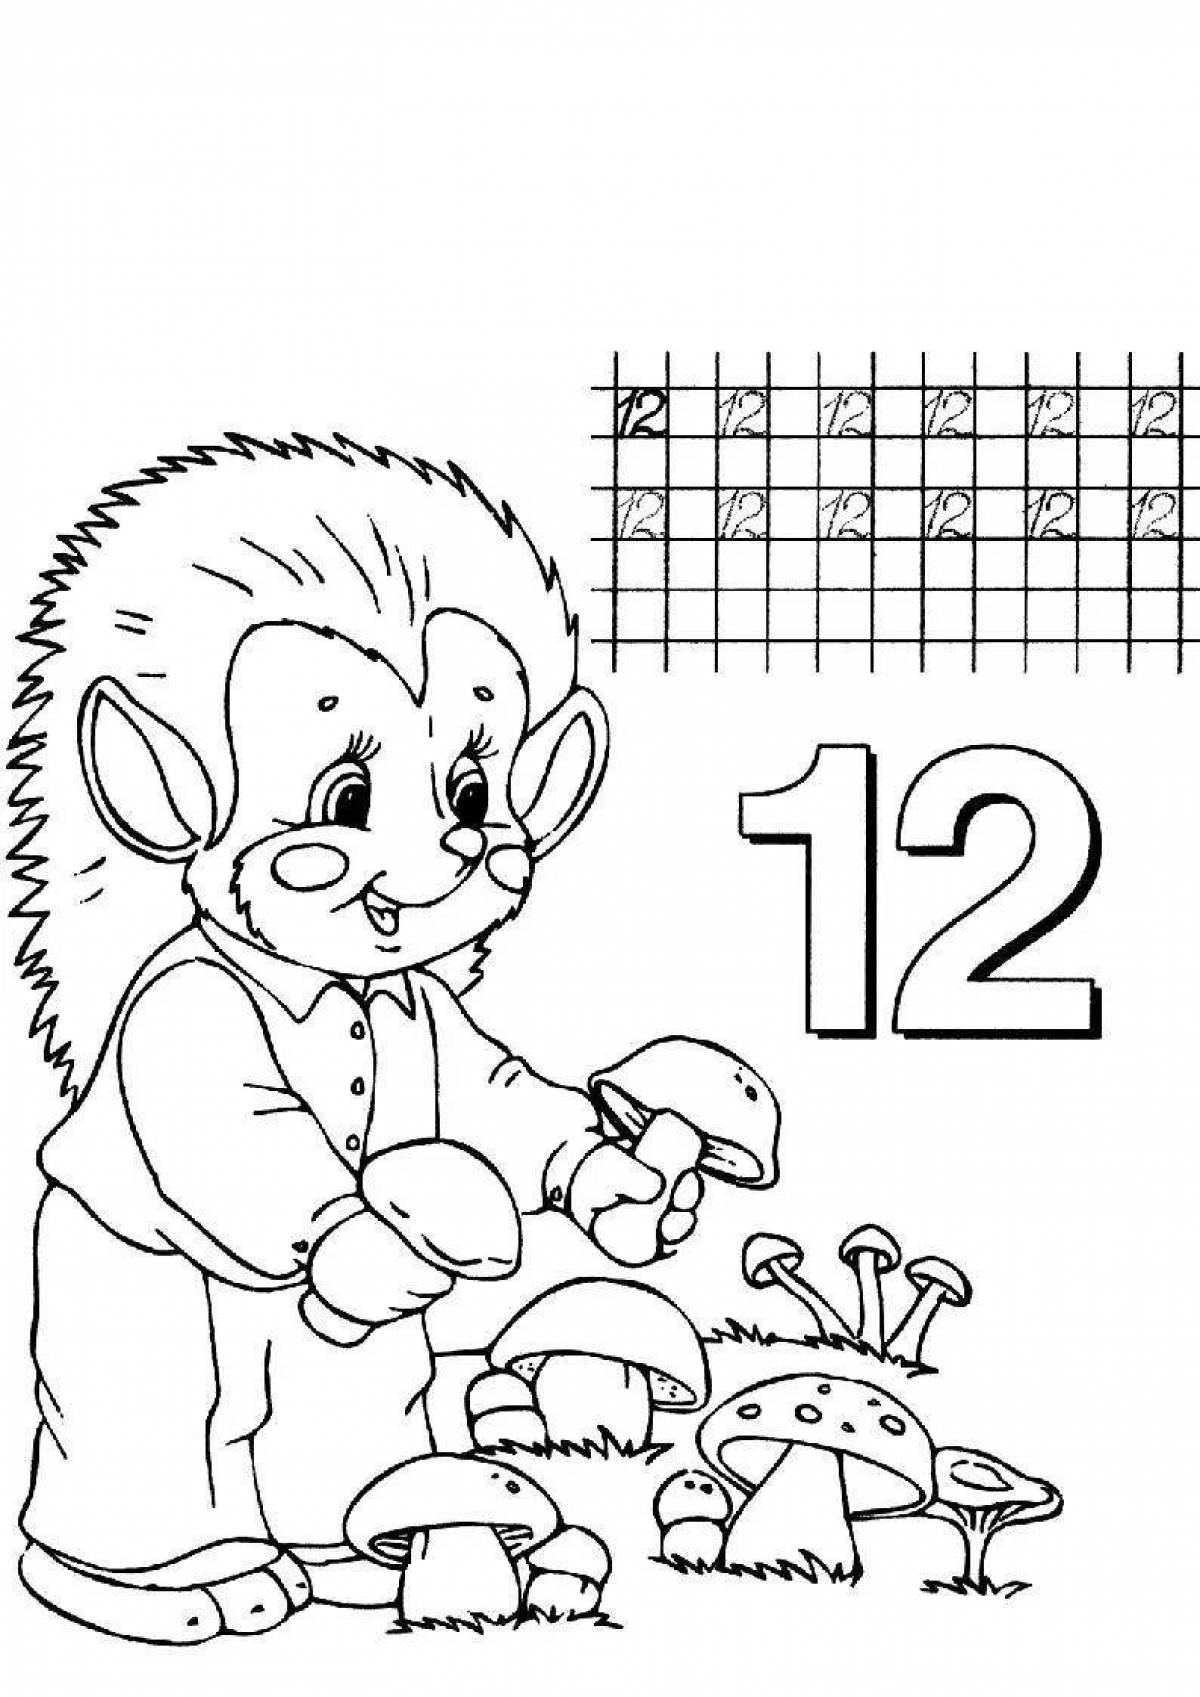 Creative letter and number coloring page for kids